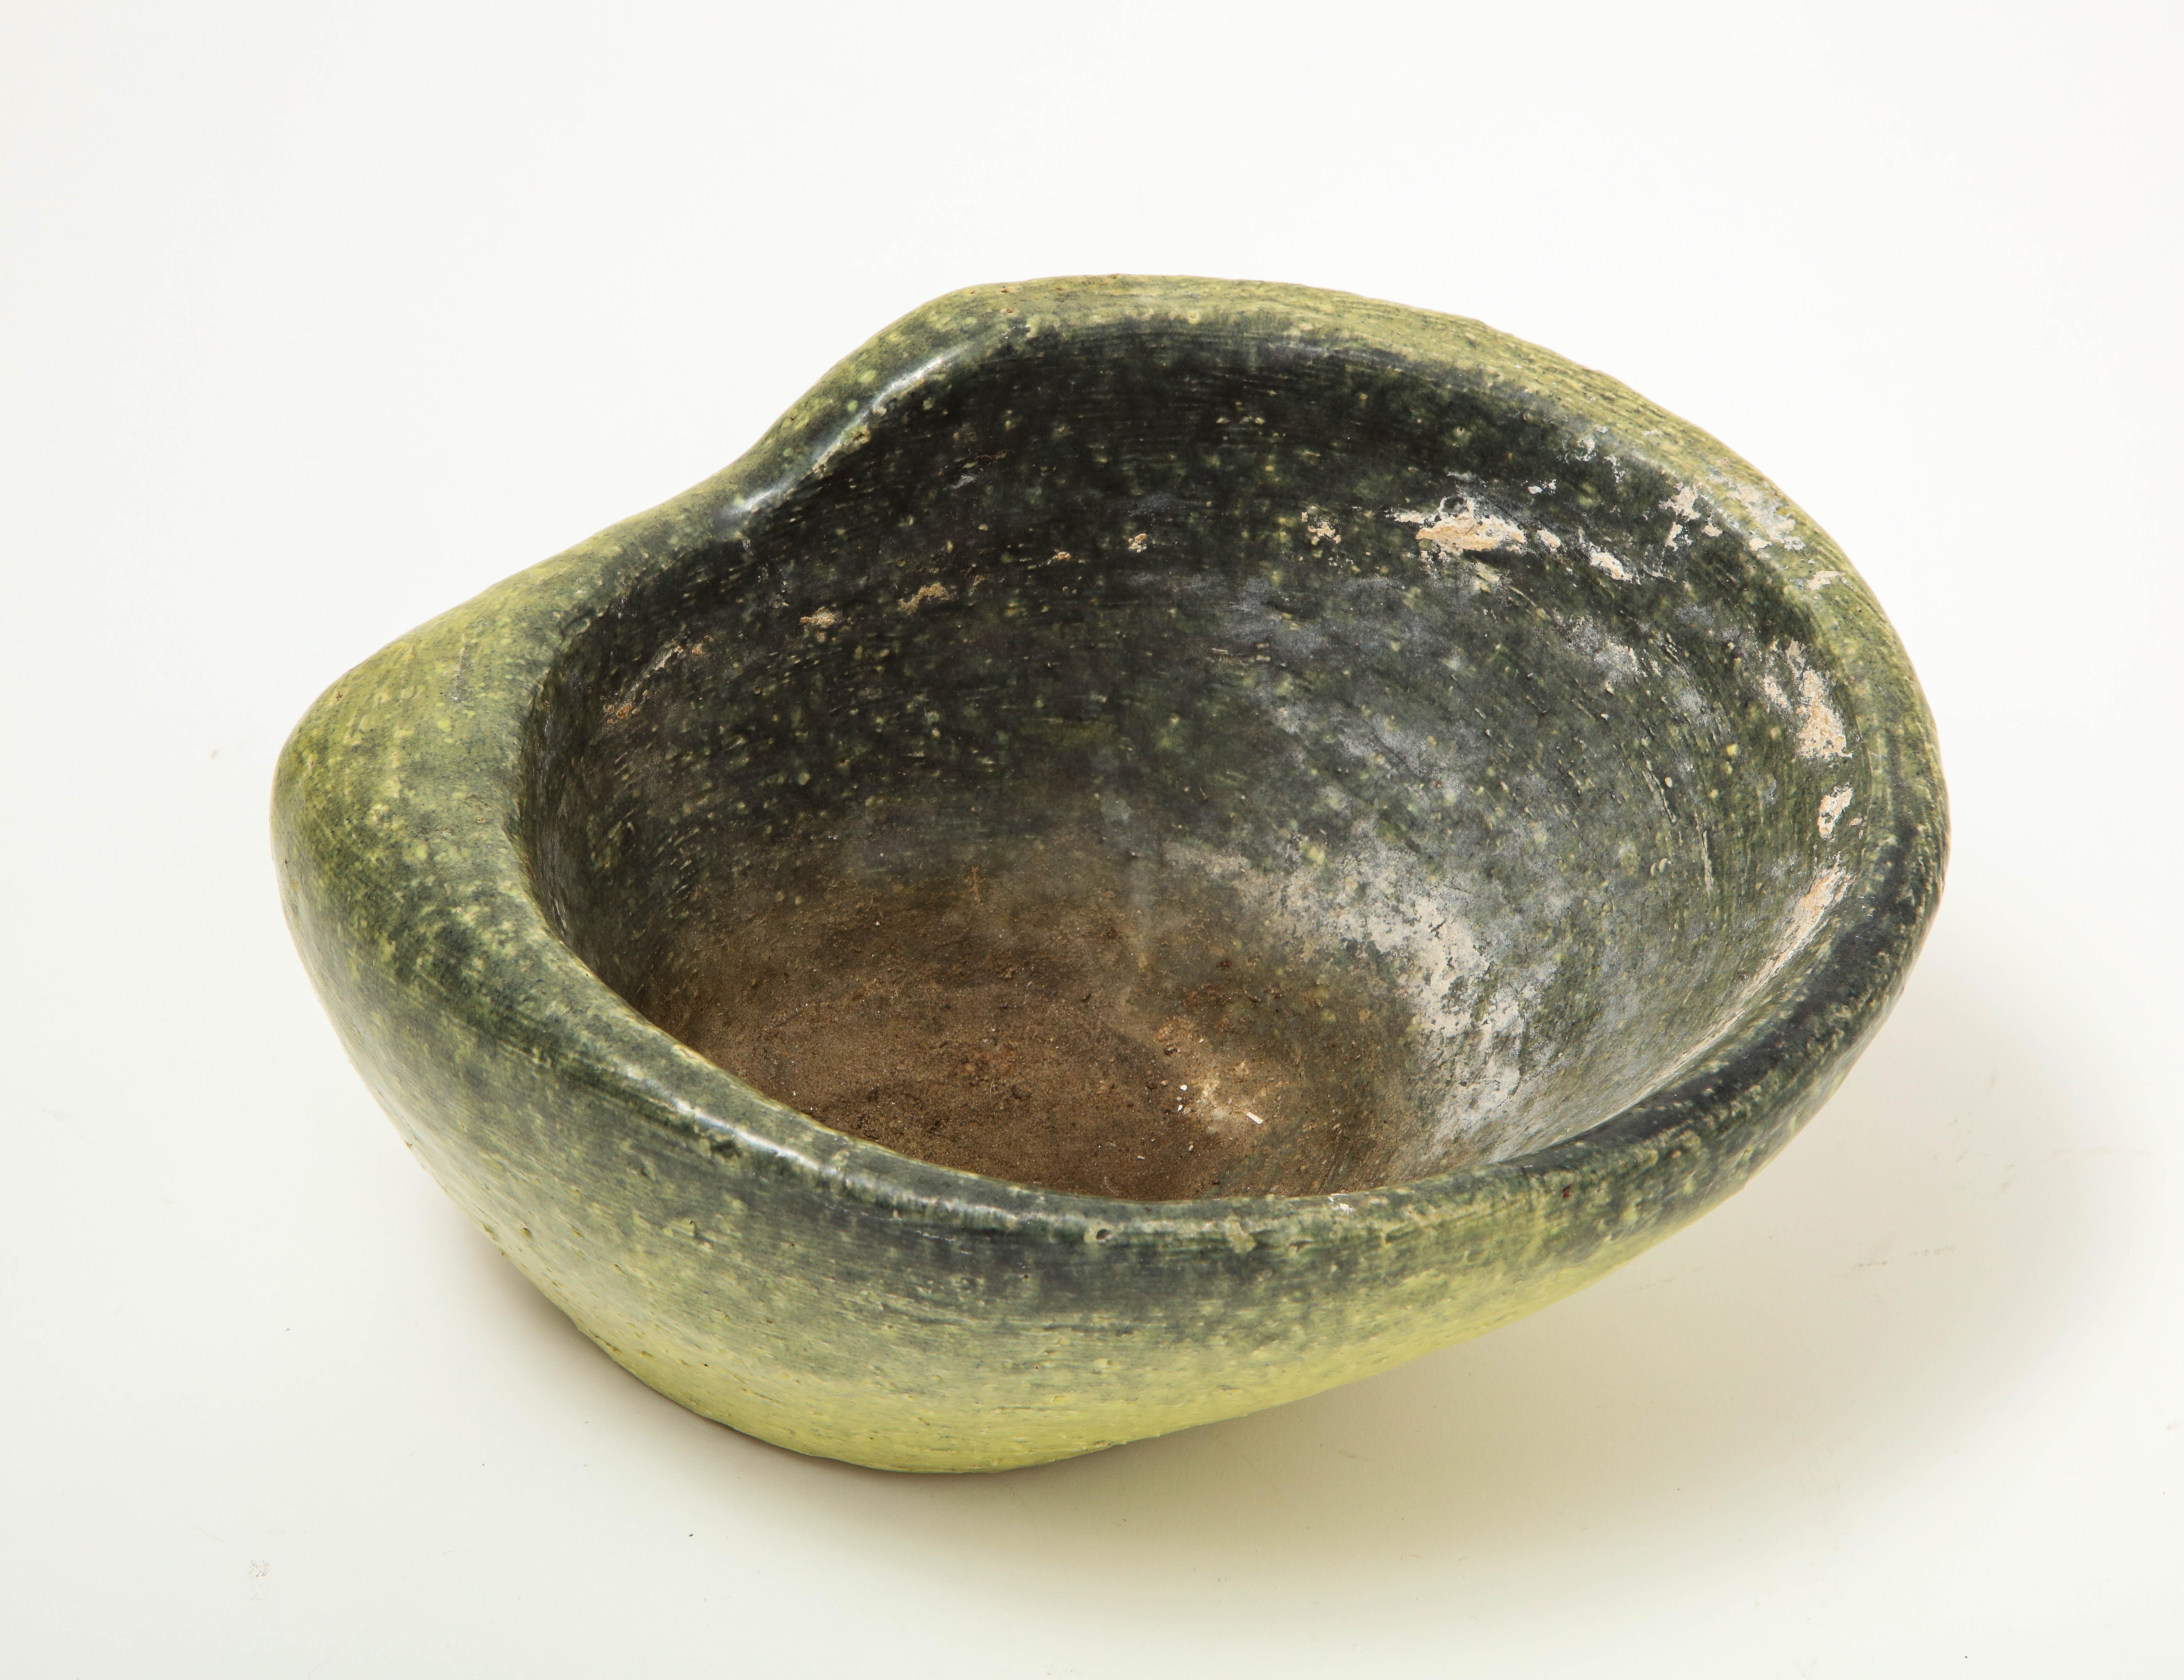 Asymmetrical serving ceramic bowl in ombre green speckled glaze, USA, mid-20th century.